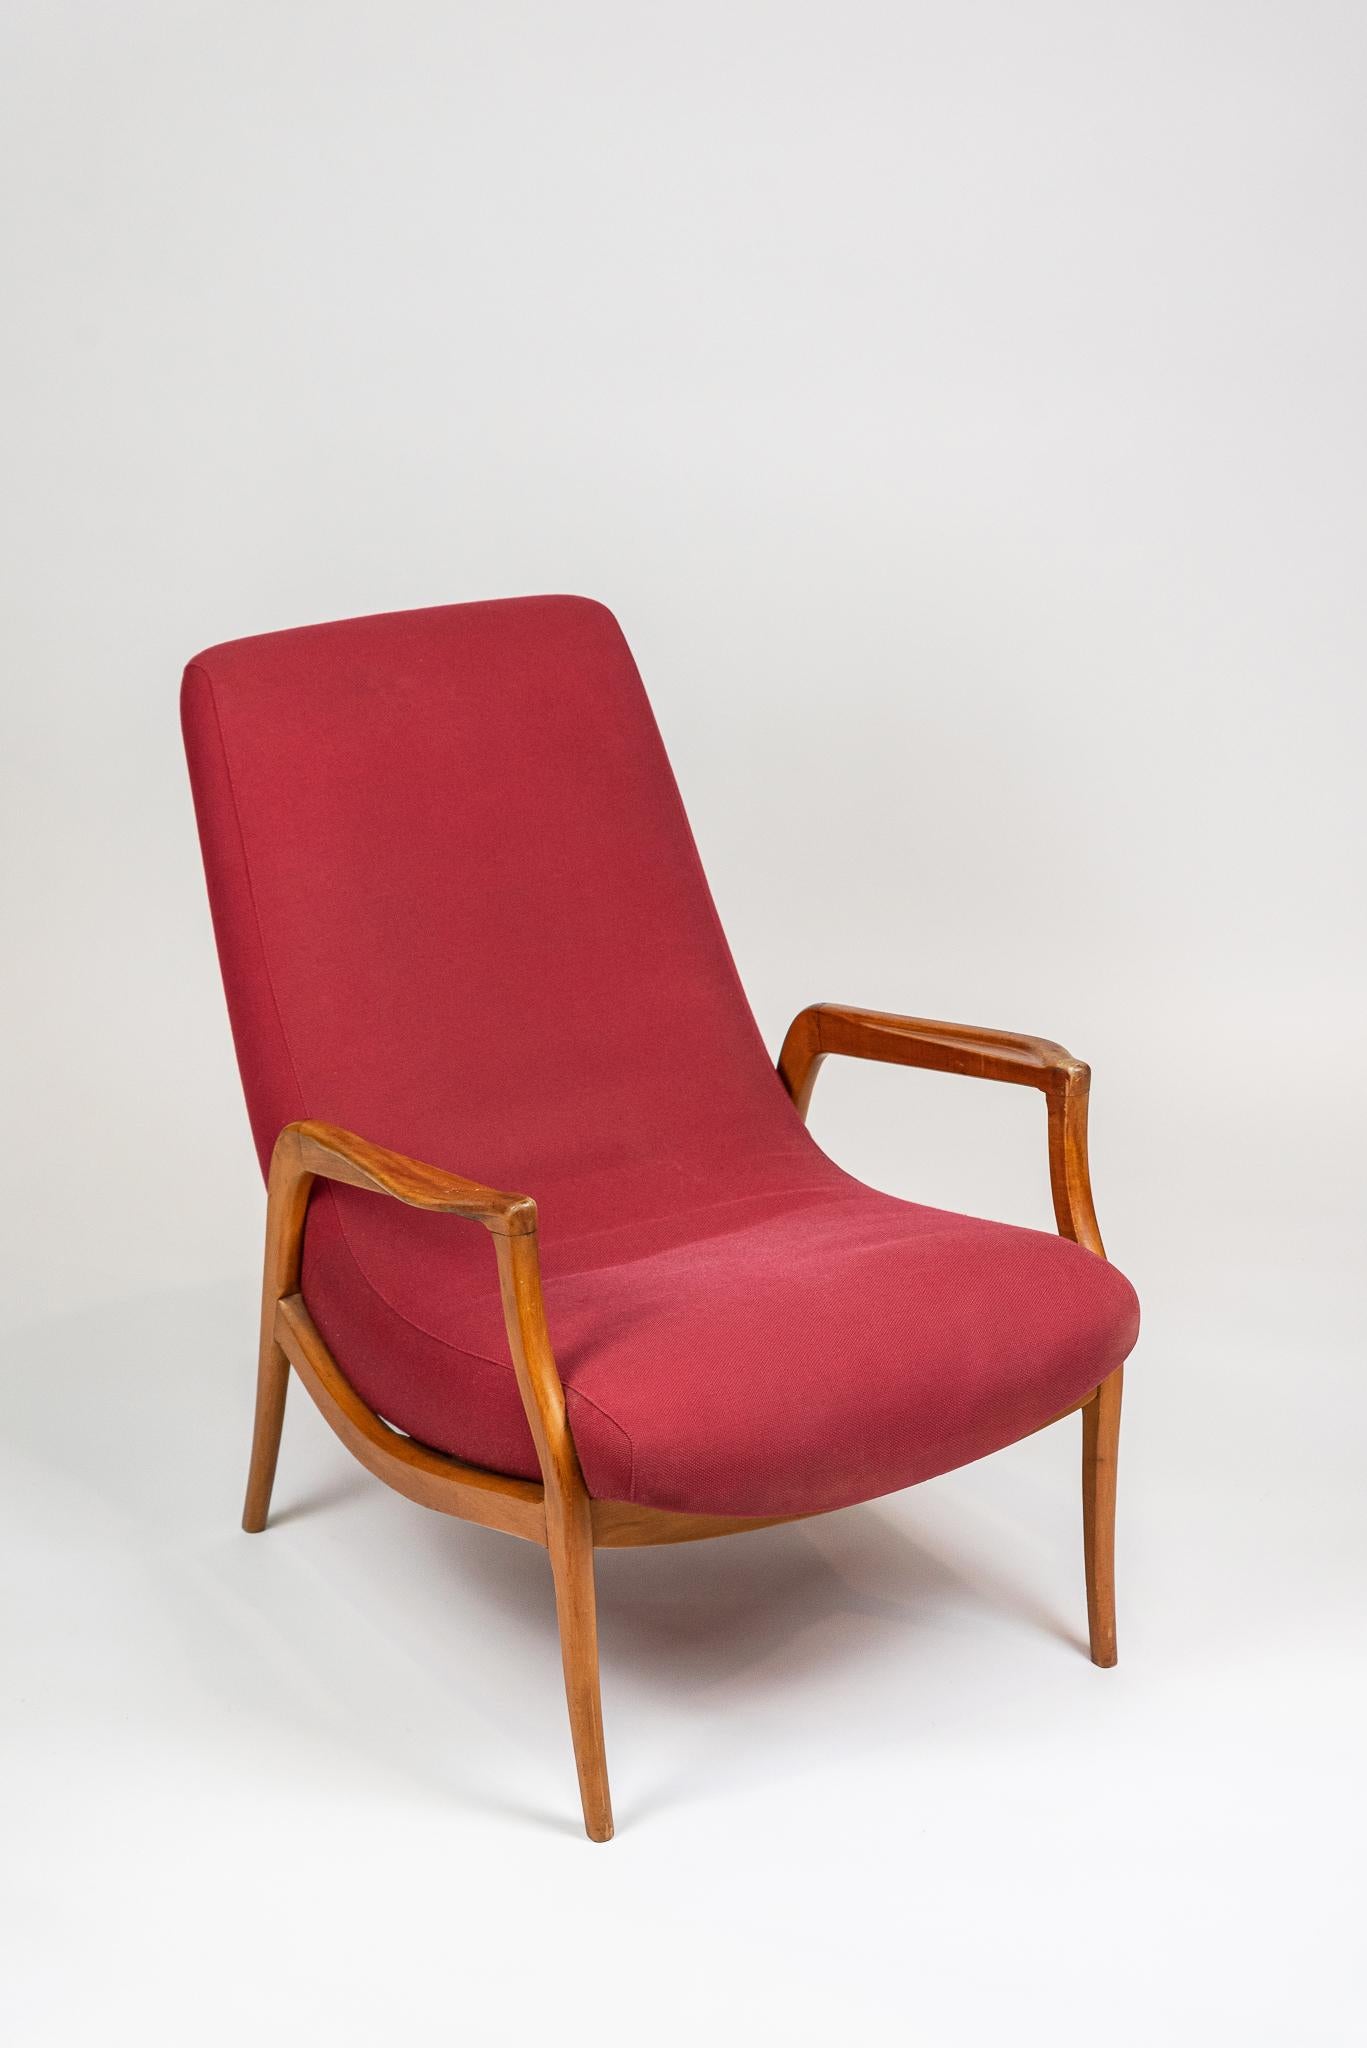 Armchair, 1960's in Caviuna and cotton.

Gelli armchair in solid wood 